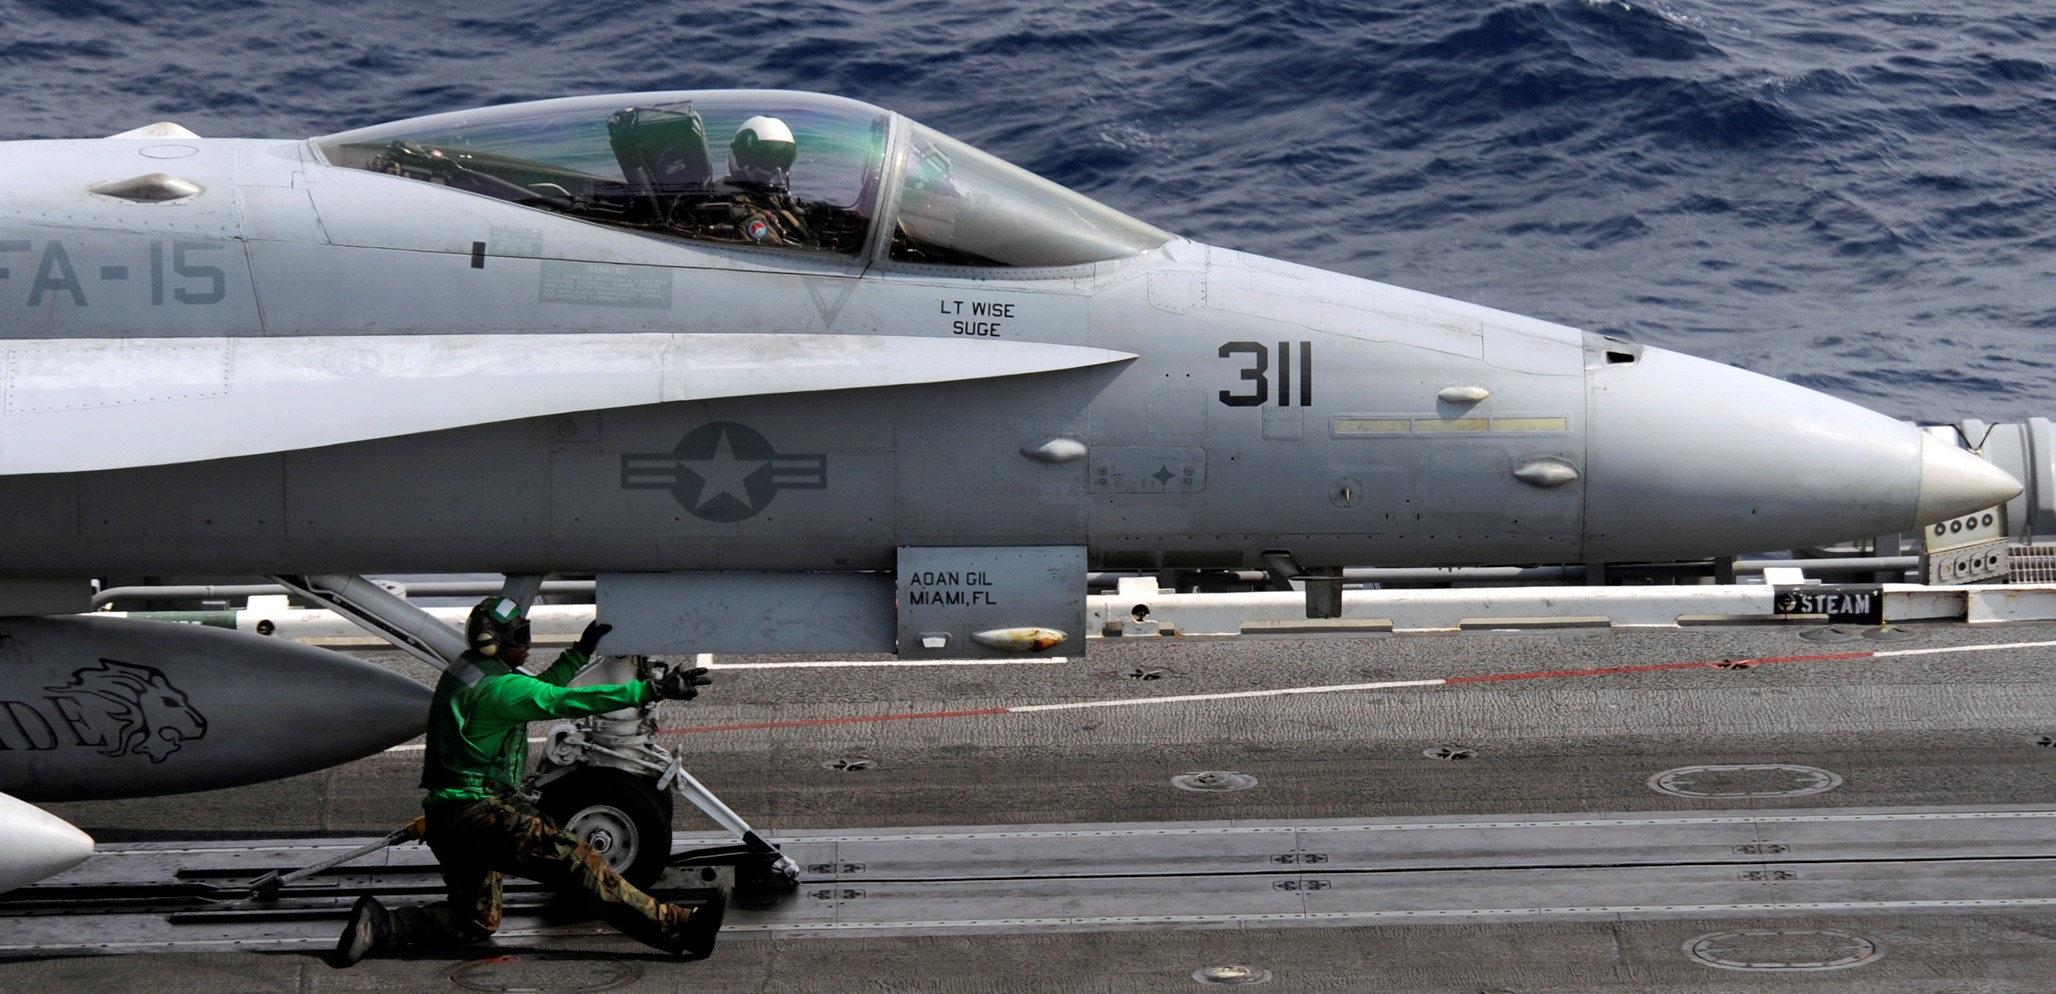 vfa-15 valions strike fighter squadron f/a-18c hornet cvn-71 uss theodore roosevelt cvw-8 us navy 58p